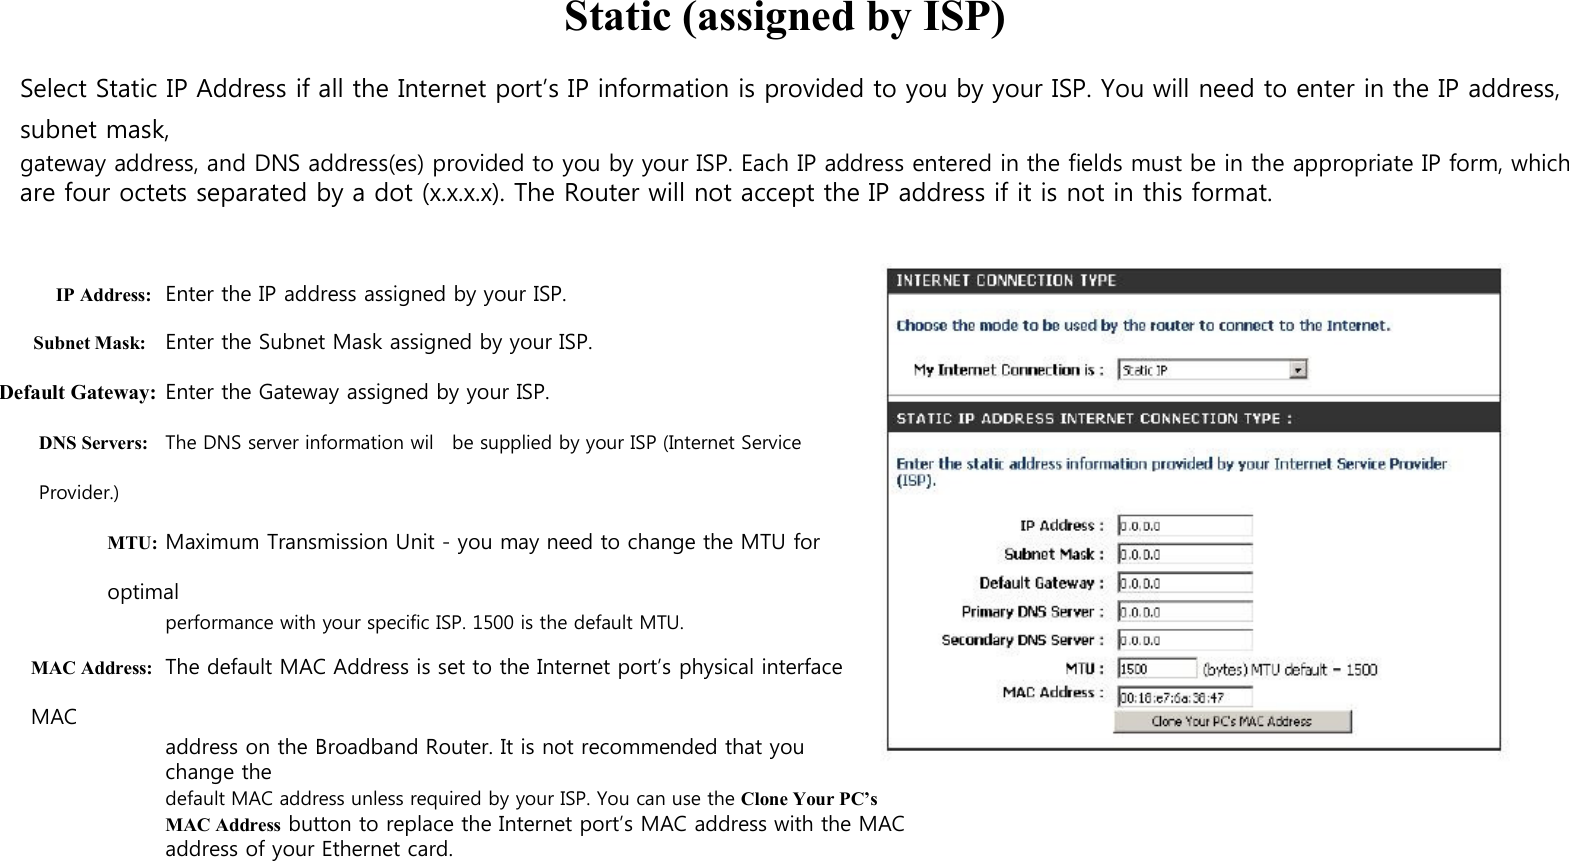   Static (assigned by ISP)  Select Static IP Address if all the Internet port’s IP information is provided to you by your ISP. You will need to enter in the IP address, subnet mask, gateway address, and DNS address(es) provided to you by your ISP. Each IP address entered in the fields must be in the appropriate IP form, which are four octets separated by a dot (x.x.x.x). The Router will not accept the IP address if it is not in this format.    IP Address: Enter the IP address assigned by your ISP. Subnet Mask: Enter the Subnet Mask assigned by your ISP. Default Gateway: Enter the Gateway assigned by your ISP. DNS Servers: The DNS server information wil   be supplied by your ISP (Internet Service Provider.) MTU: Maximum Transmission Unit - you may need to change the MTU for optimal performance with your specific ISP. 1500 is the default MTU. MAC Address: The default MAC Address is set to the Internet port’s physical interface MAC address on the Broadband Router. It is not recommended that you change the default MAC address unless required by your ISP. You can use the Clone Your PC’s MAC Address button to replace the Internet port’s MAC address with the MAC address of your Ethernet card. 